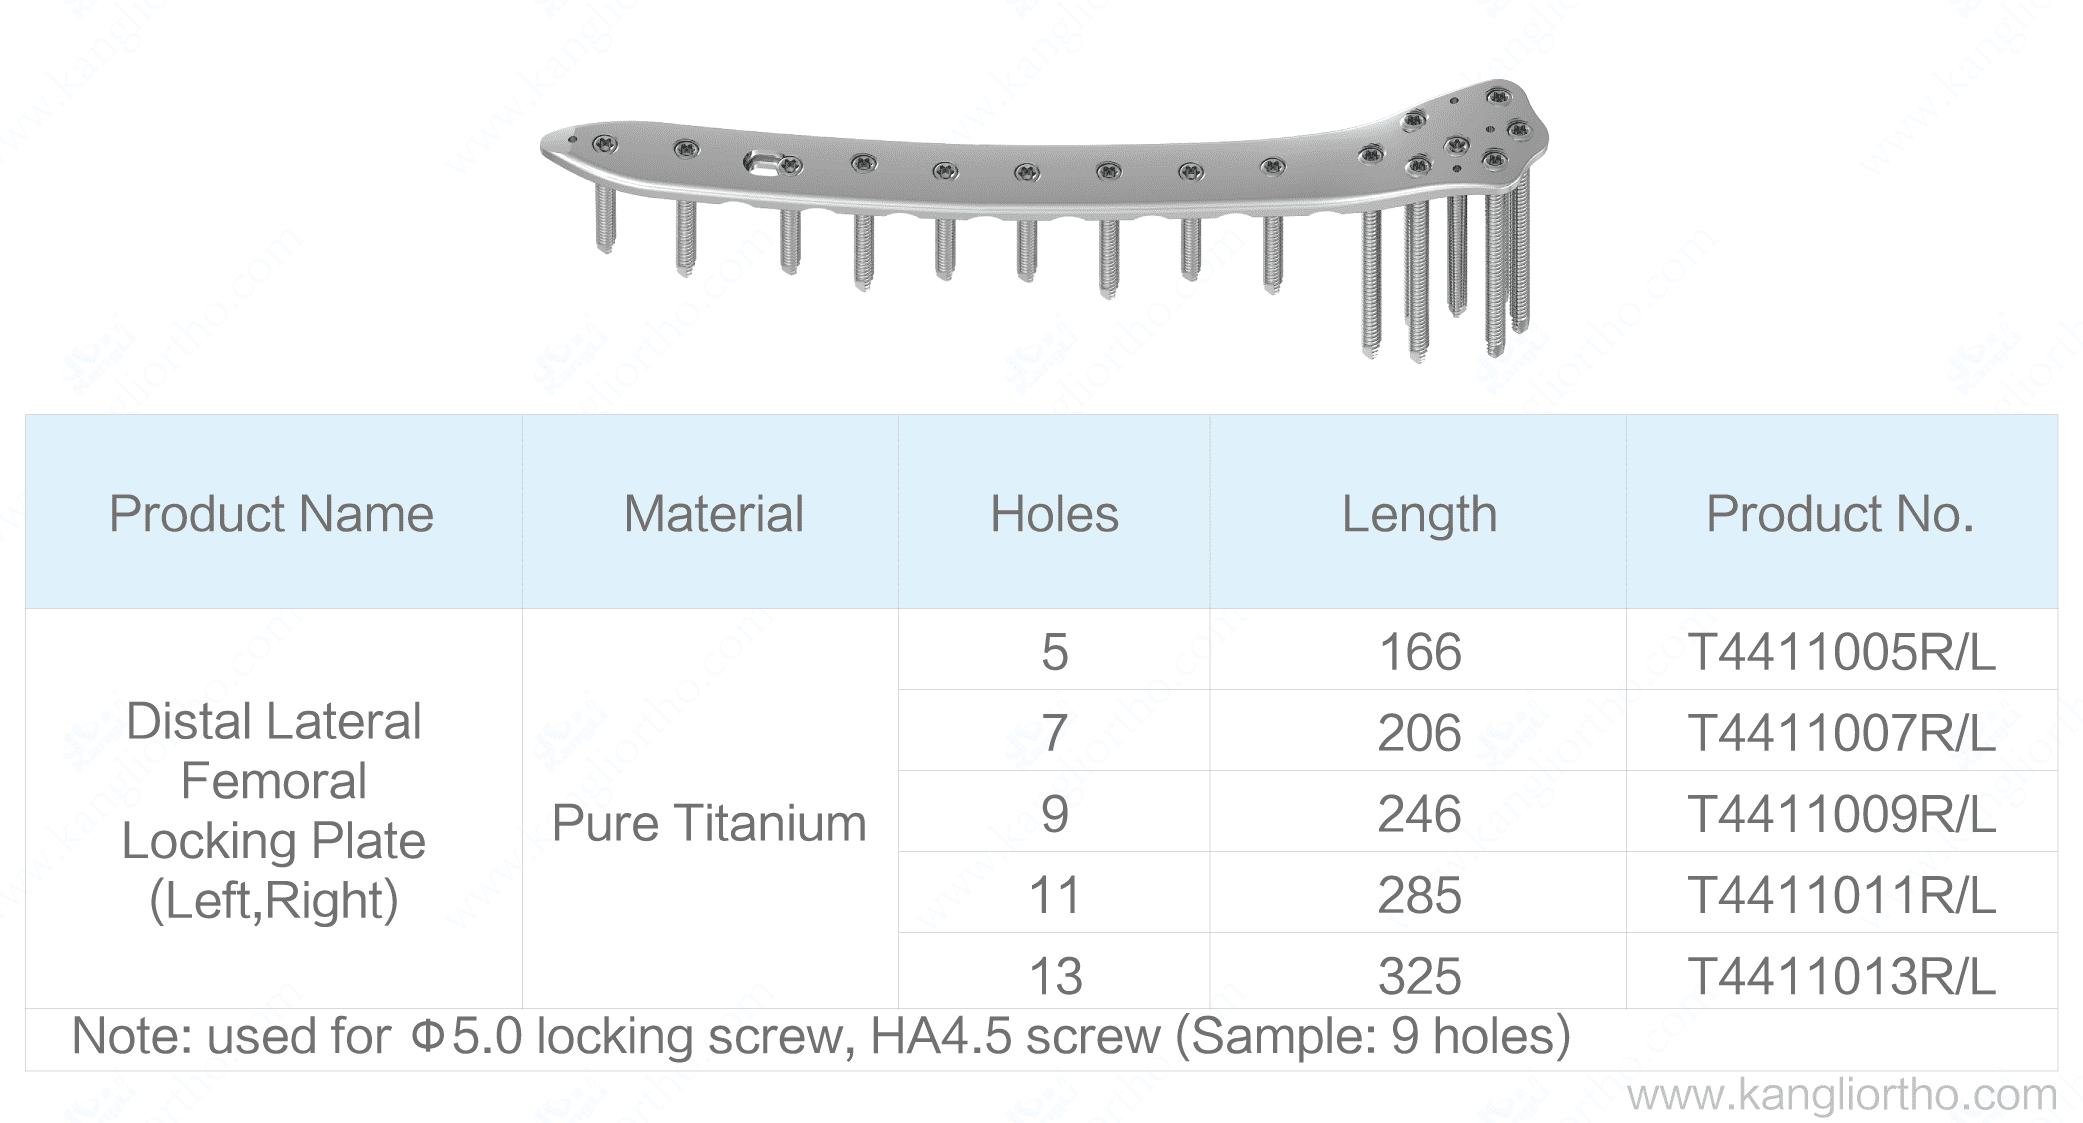 distal-lateral-femoral-locking-plate-specifications